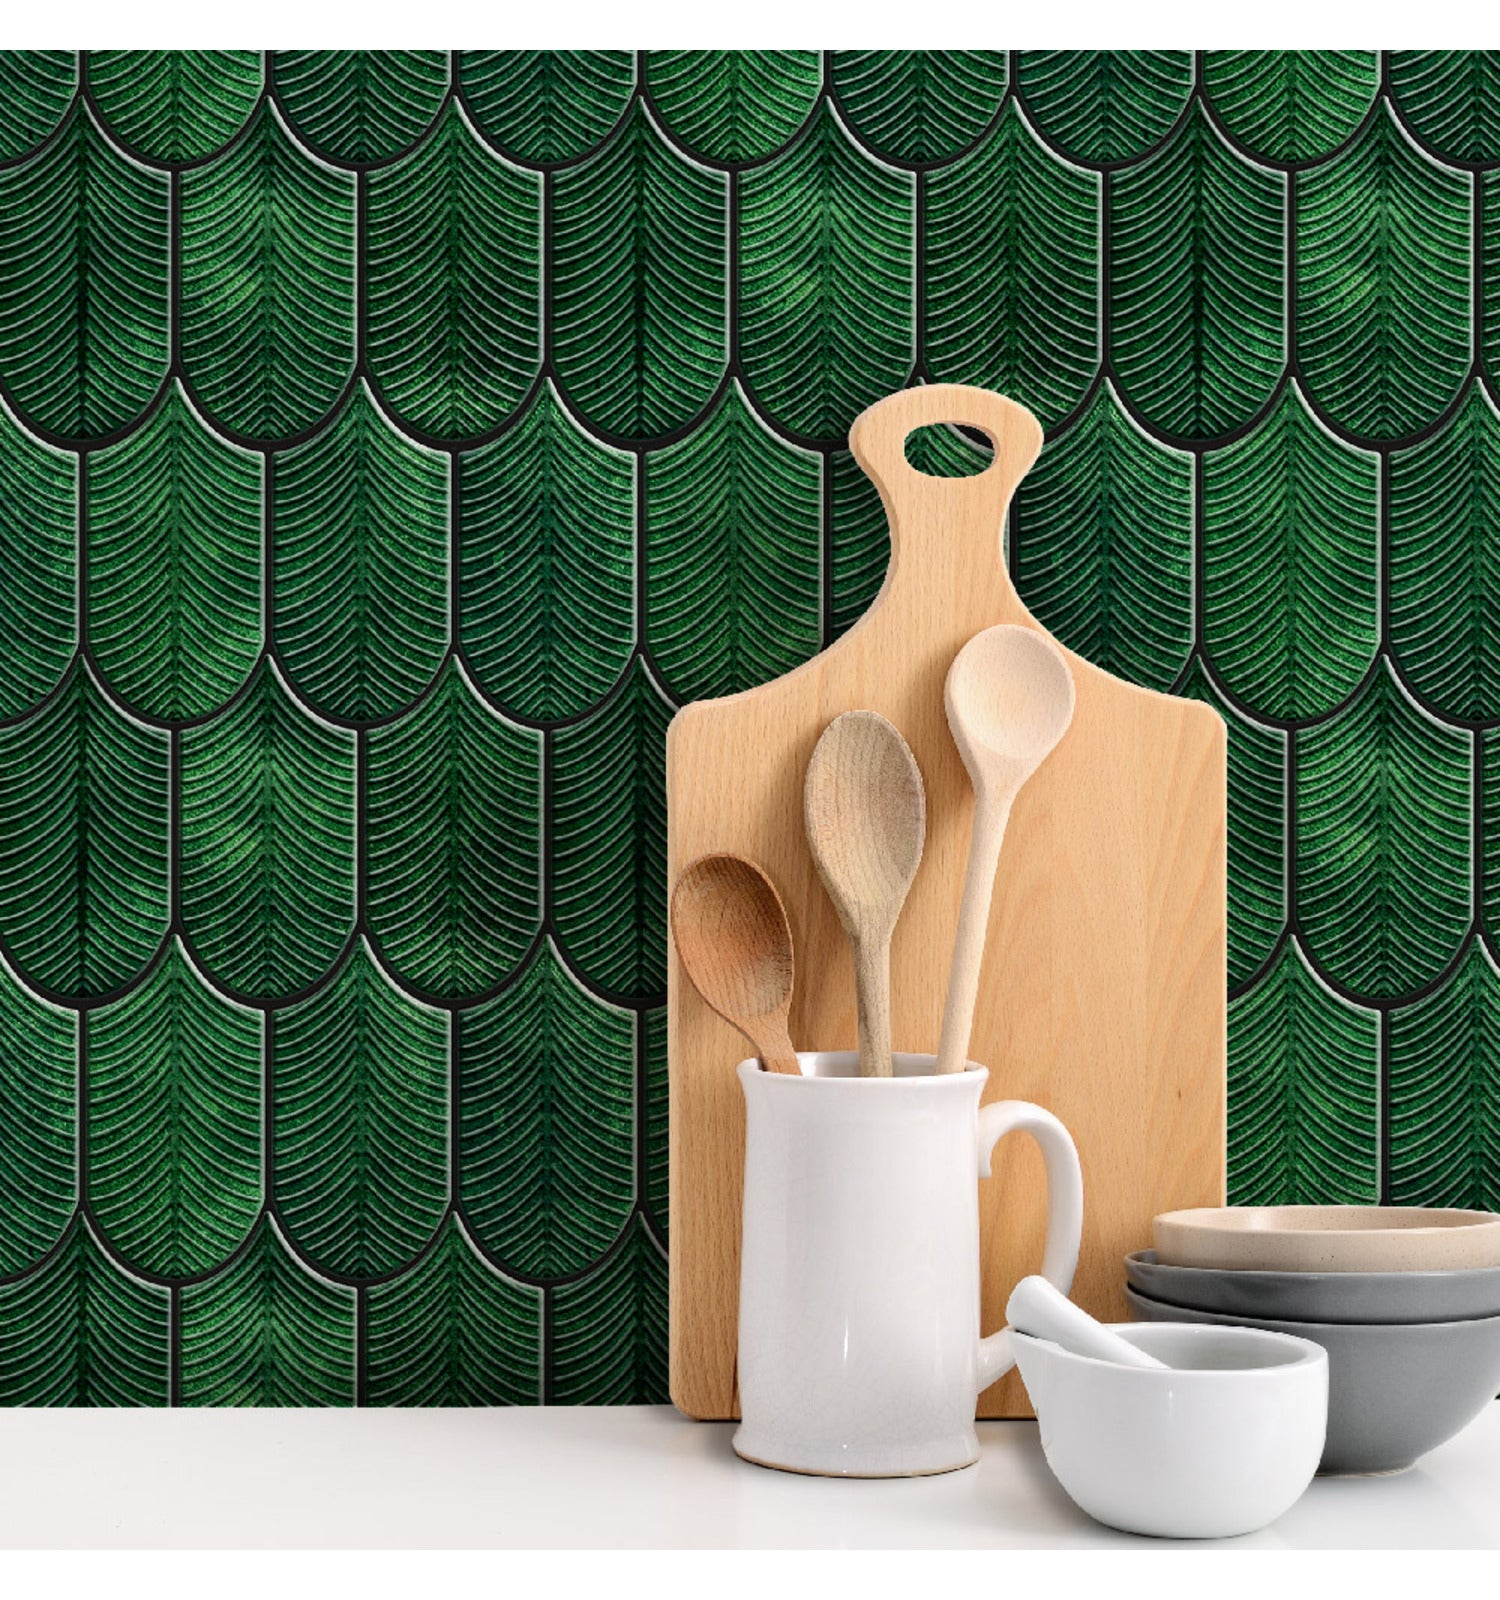 Emerald Green Peel And Stick Wall Tile | Kitchen Backsplash Self Adhesive Tiles For Home Décor